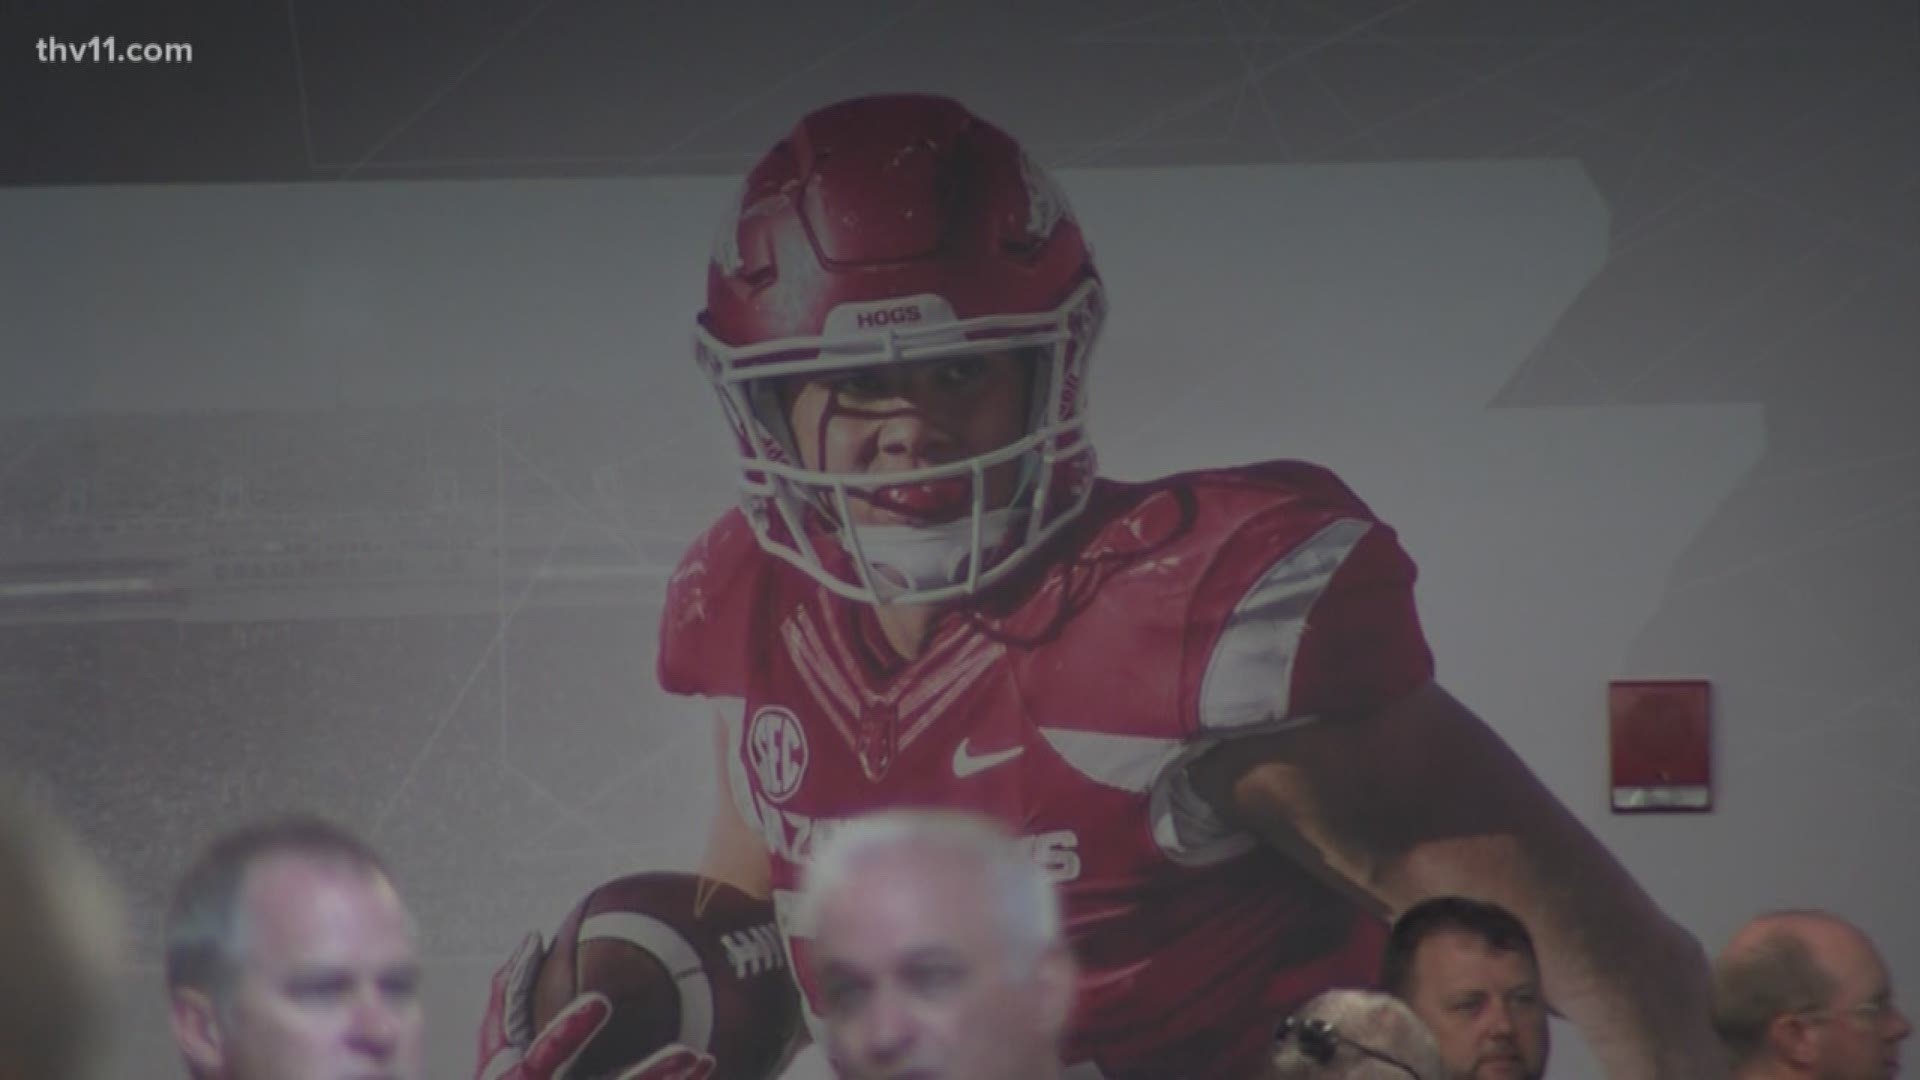 New facilities a "game changer" for Razorback recruiting